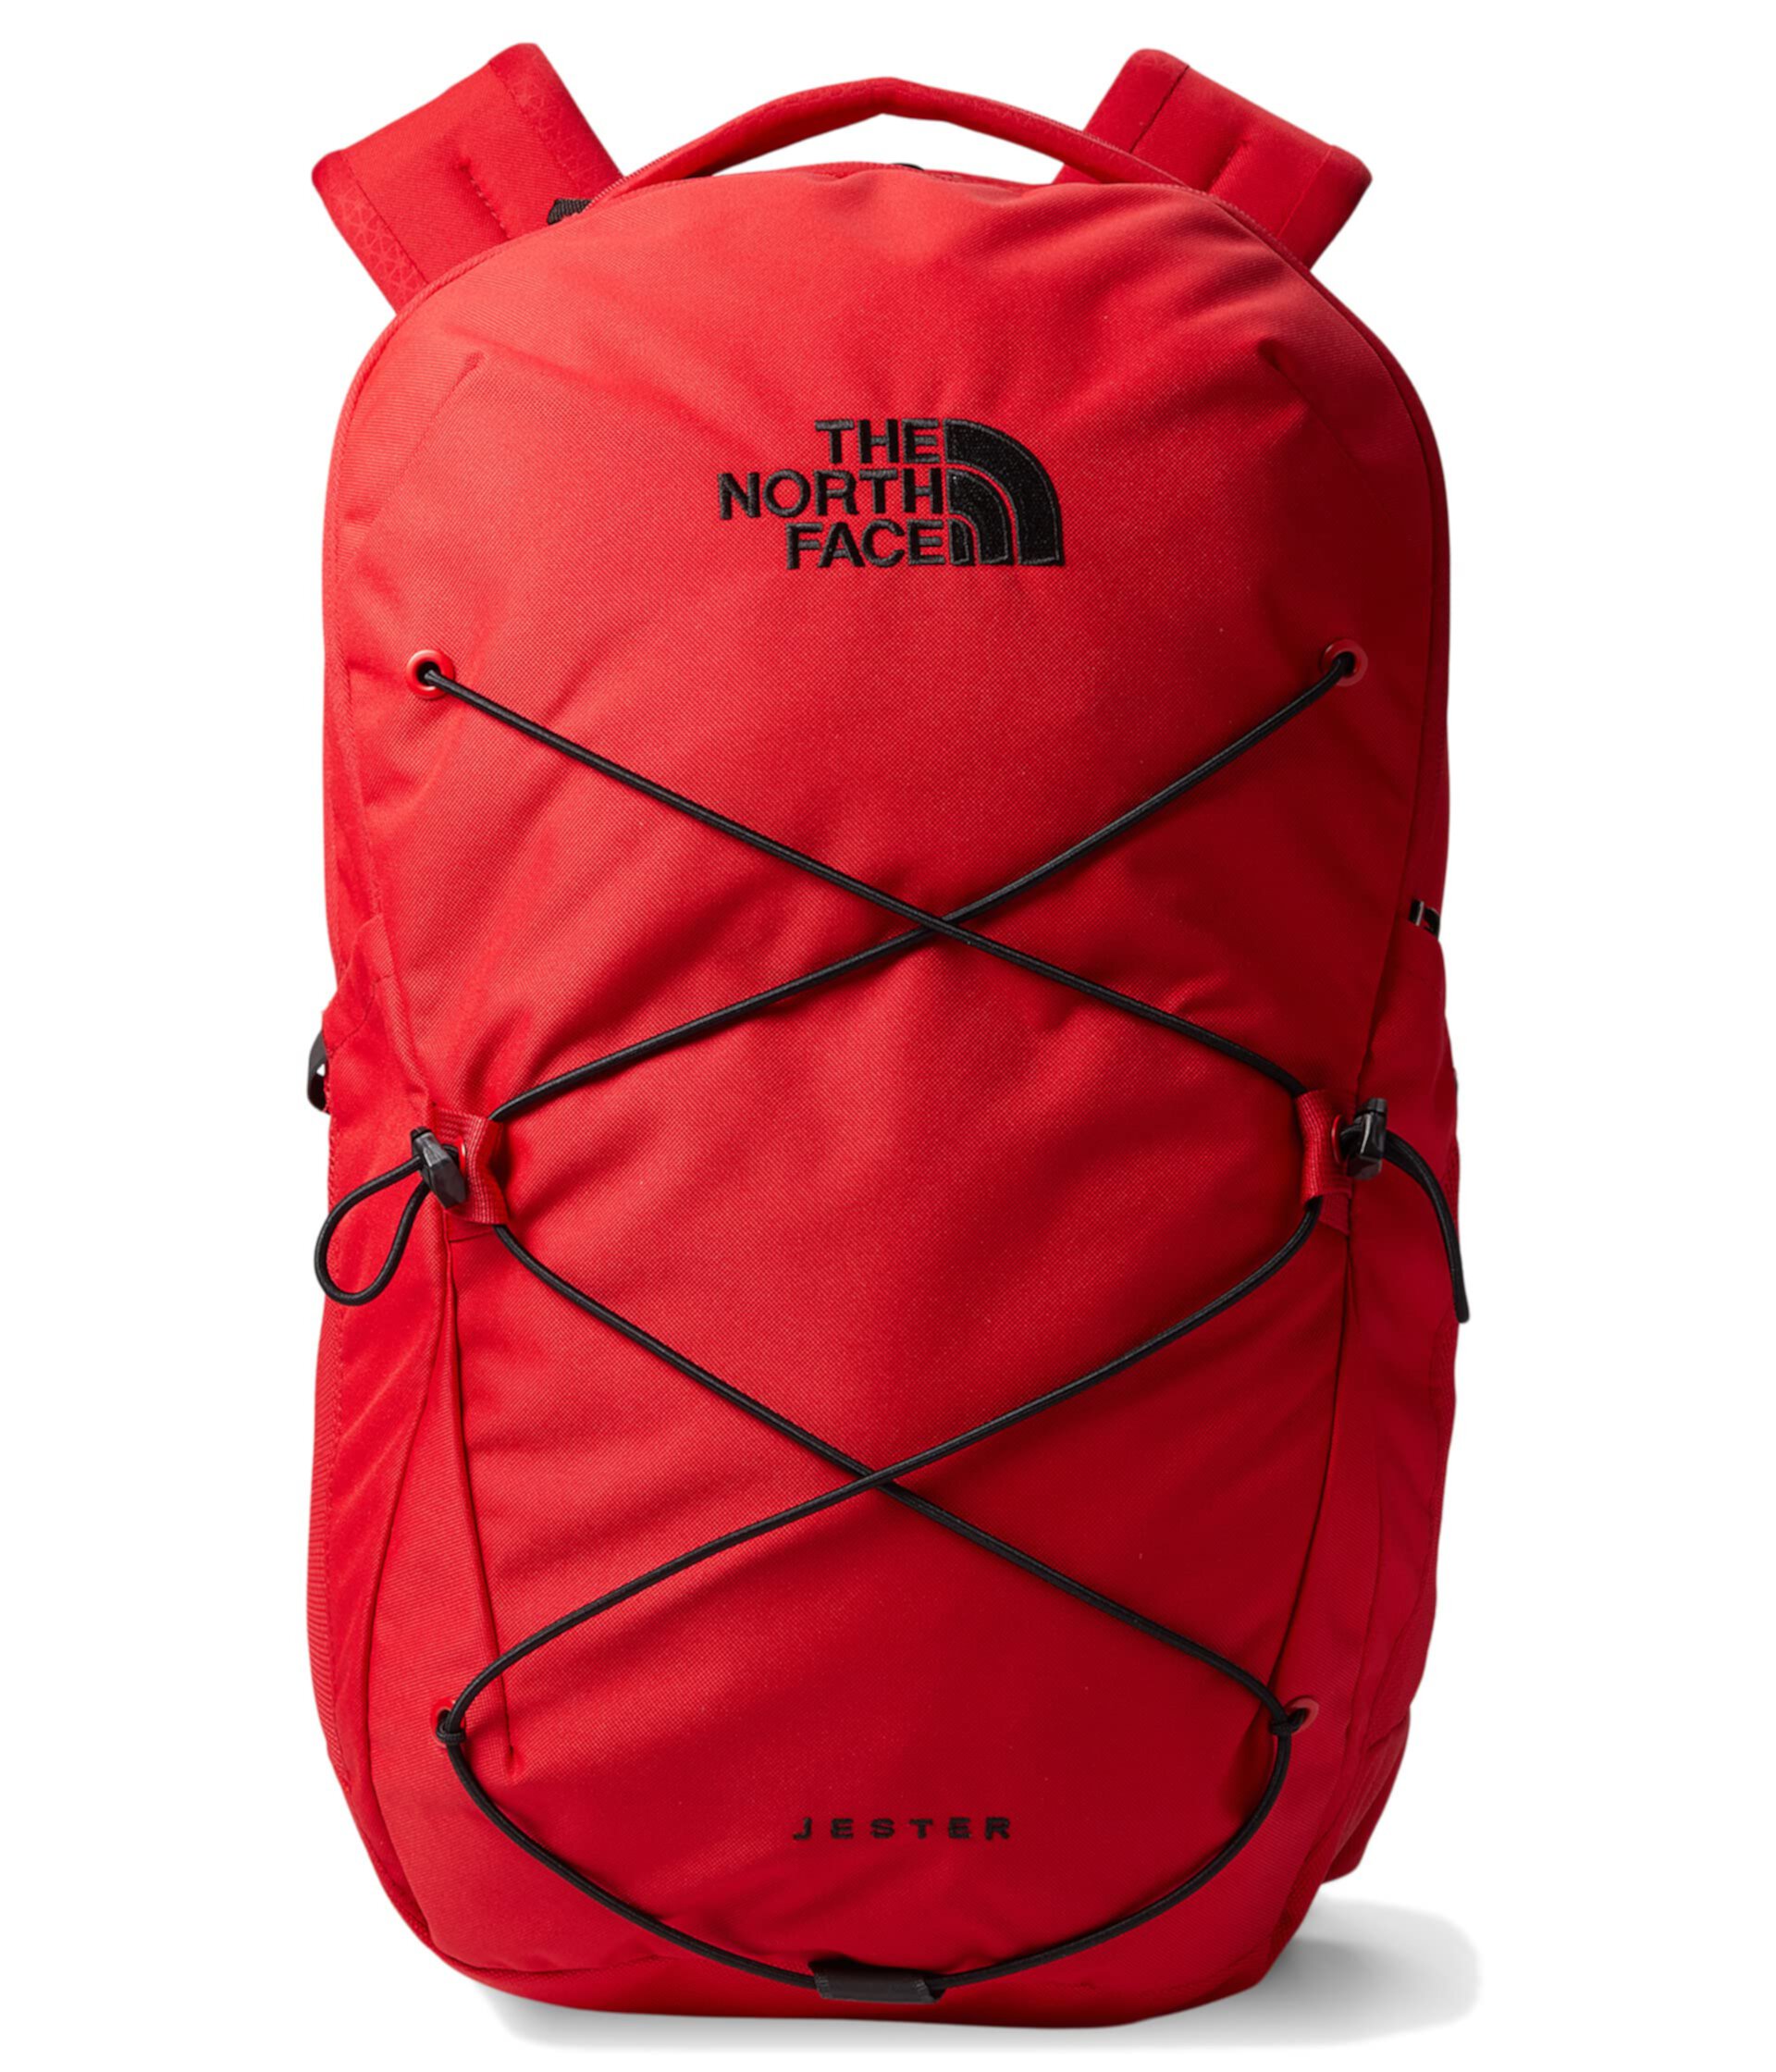 Унисекс Рюкзак Jester от The North Face The North Face